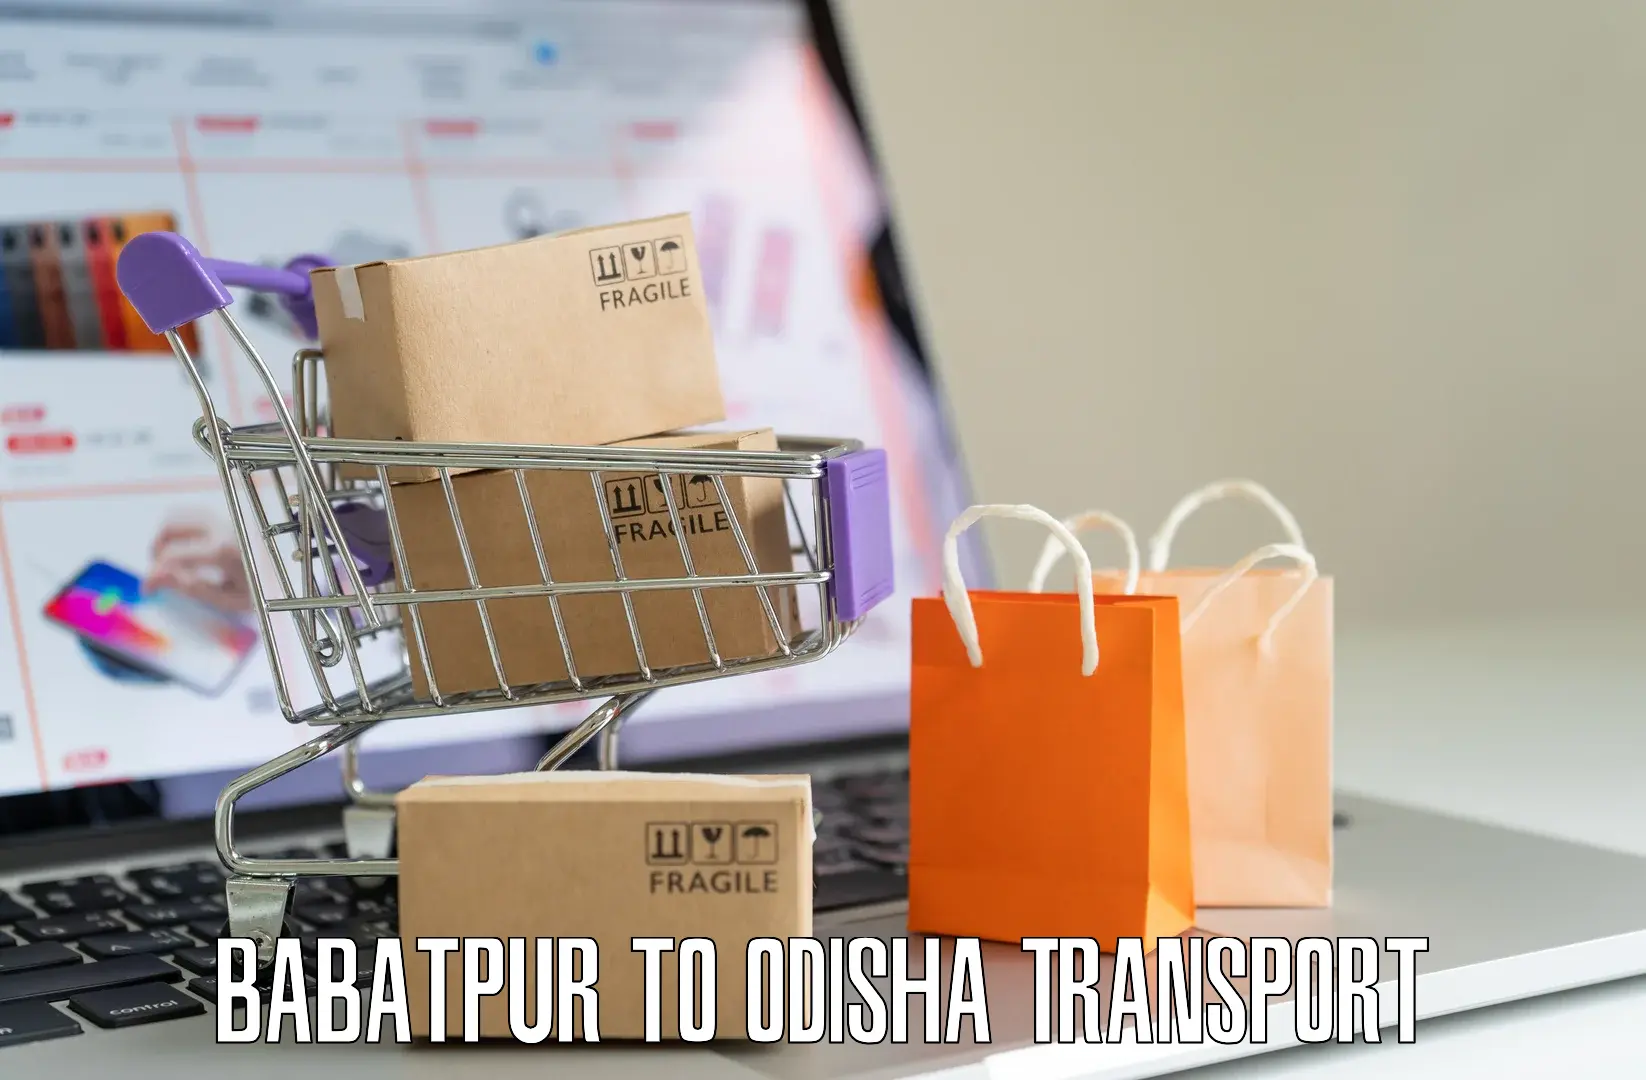 Material transport services Babatpur to Loisingha